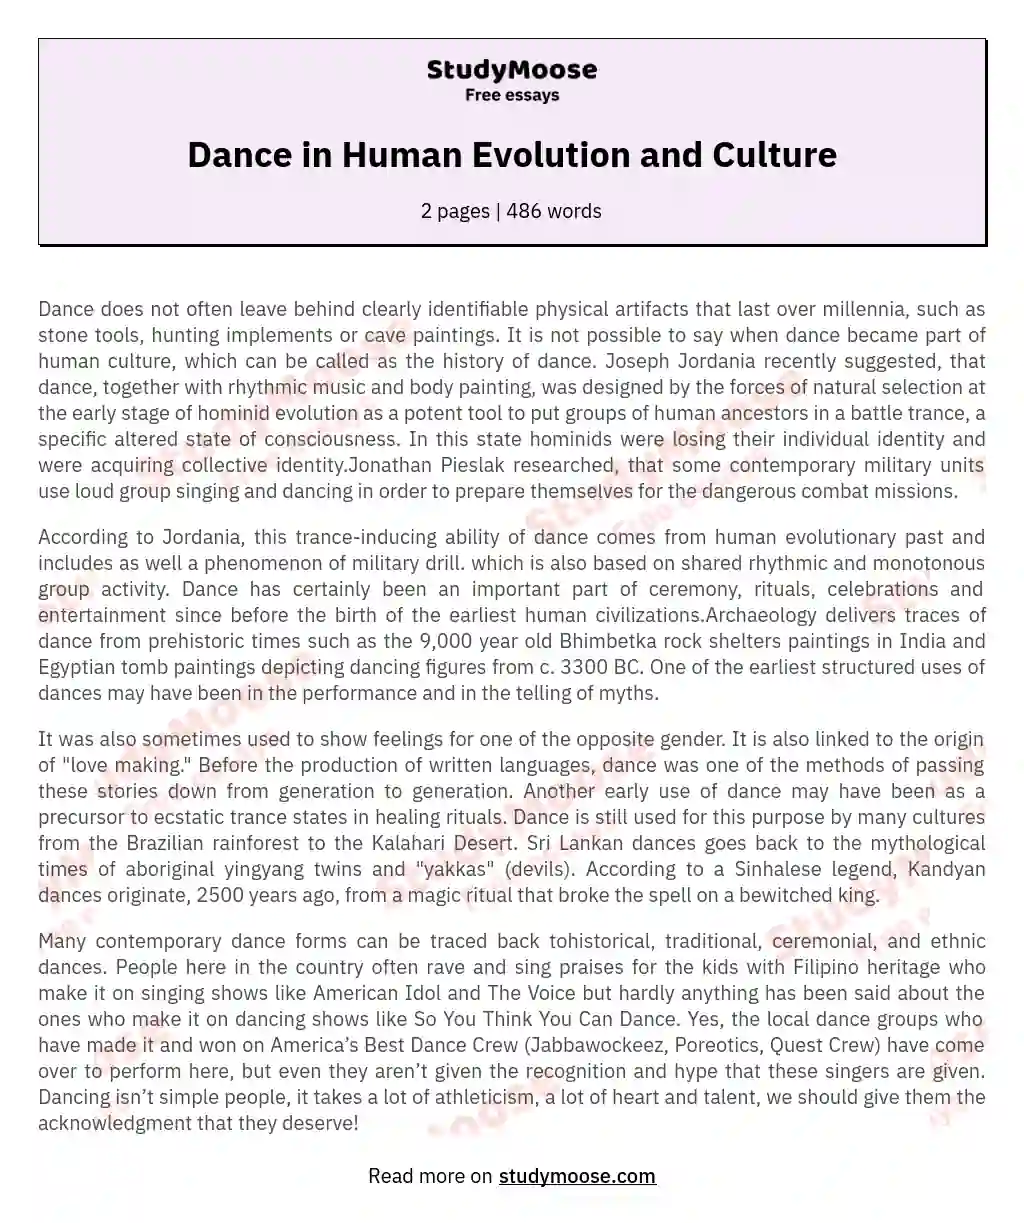 Dance in Human Evolution and Culture essay